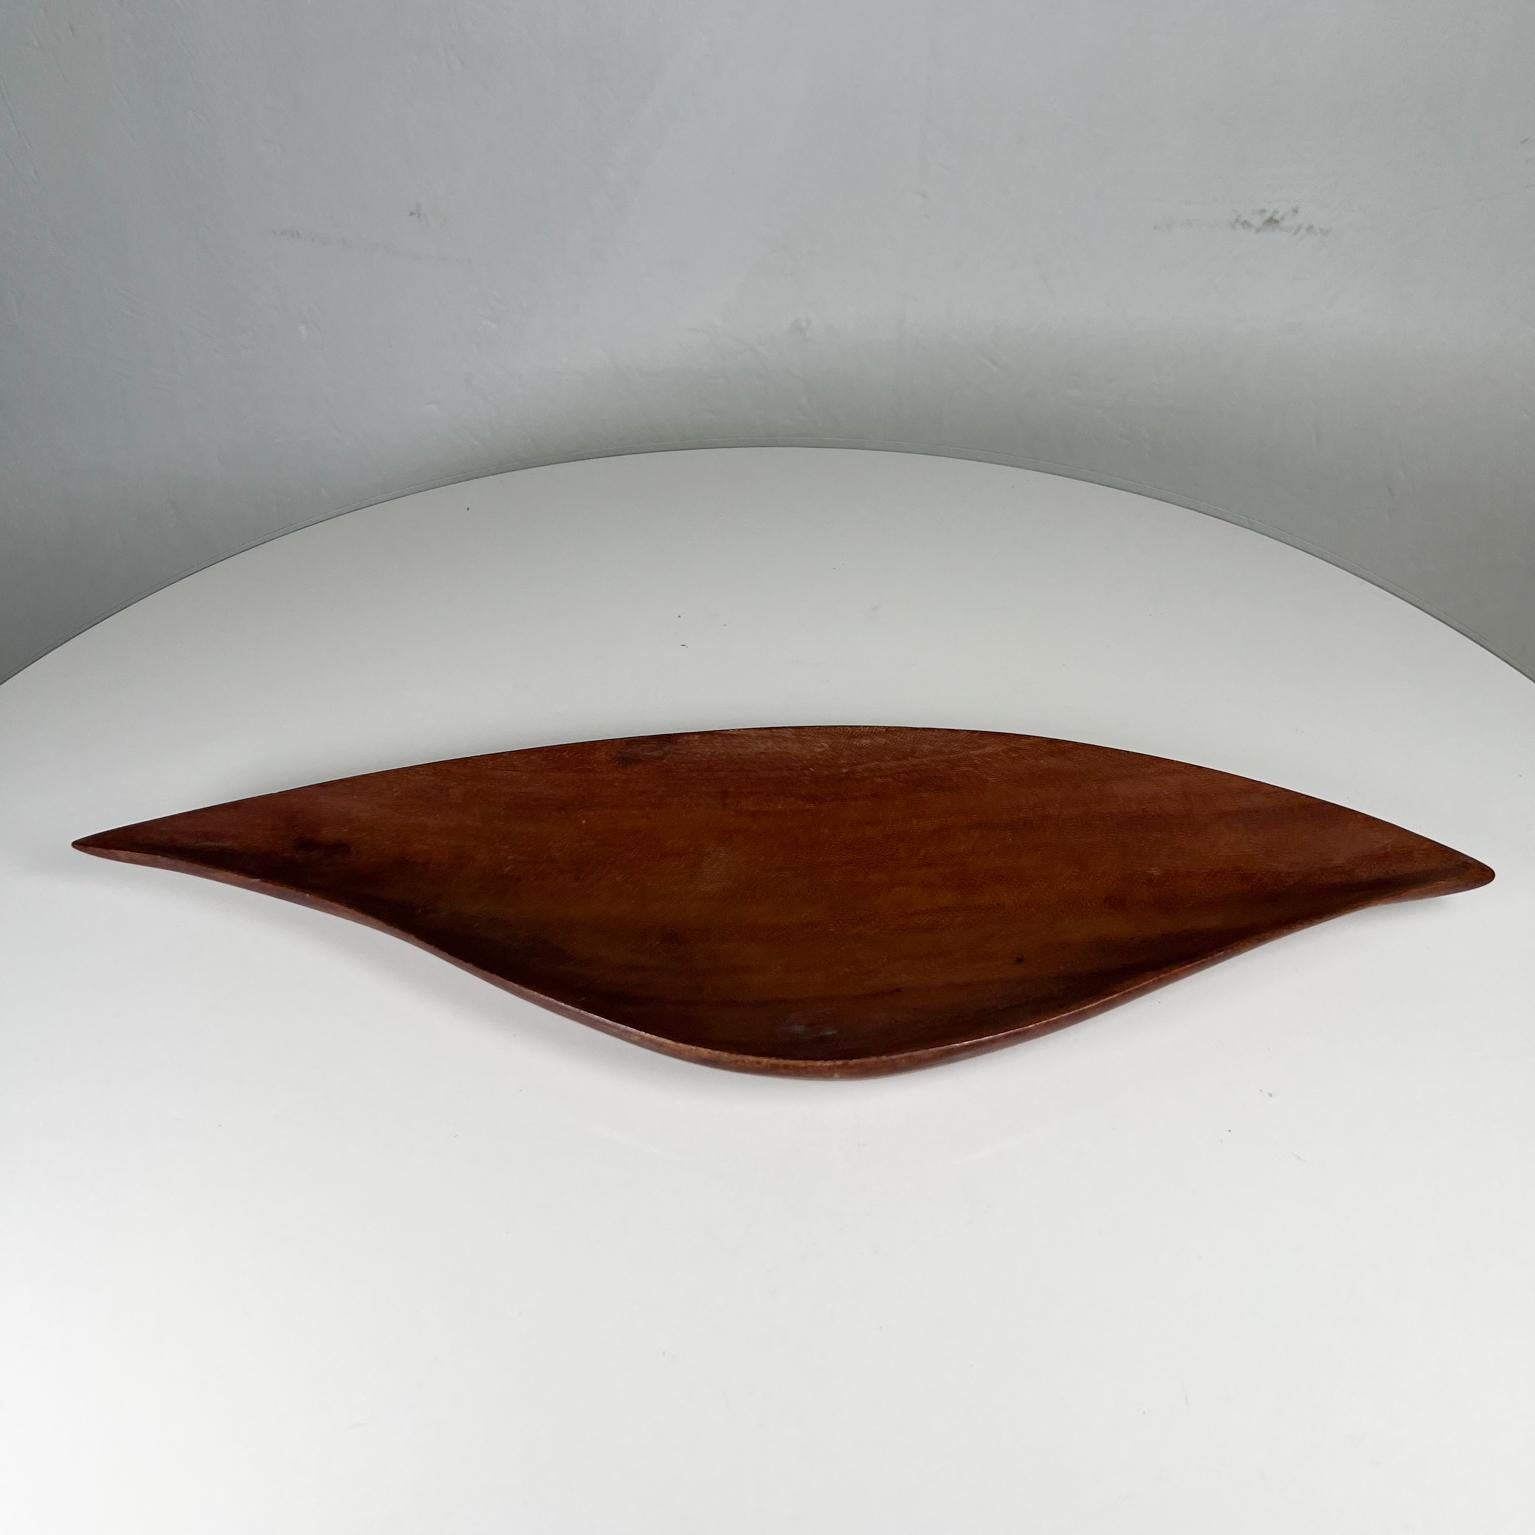 20th Century 1970s Modern Haiti Sculptural Tray Wood Serving Dish Organic Form For Sale